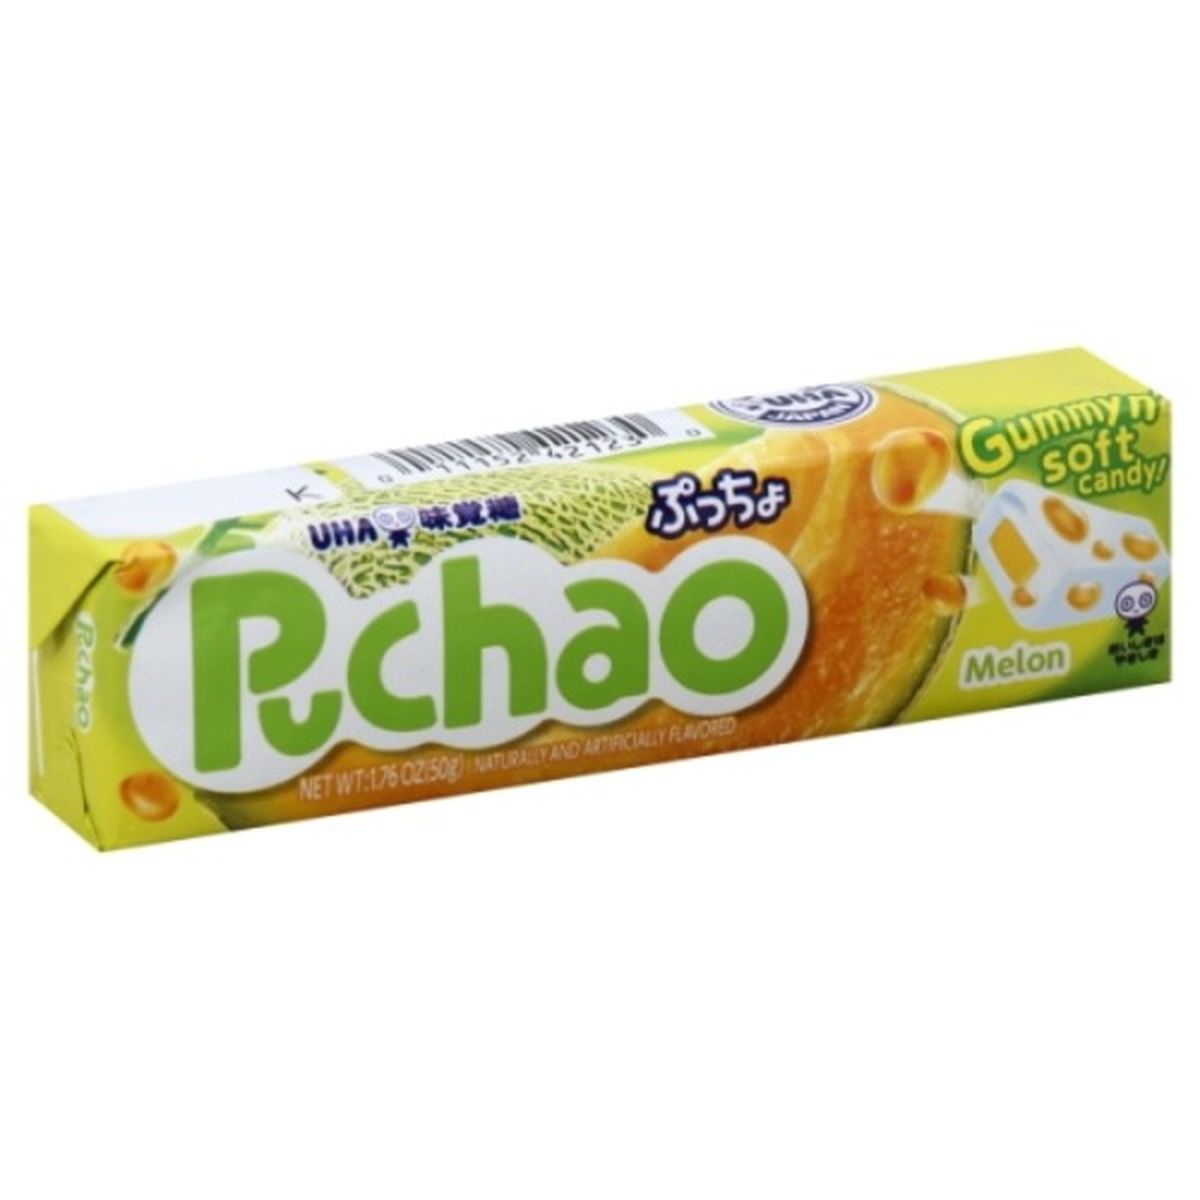 Calories in Puchao Candy!, Gummy n' Soft, Melon